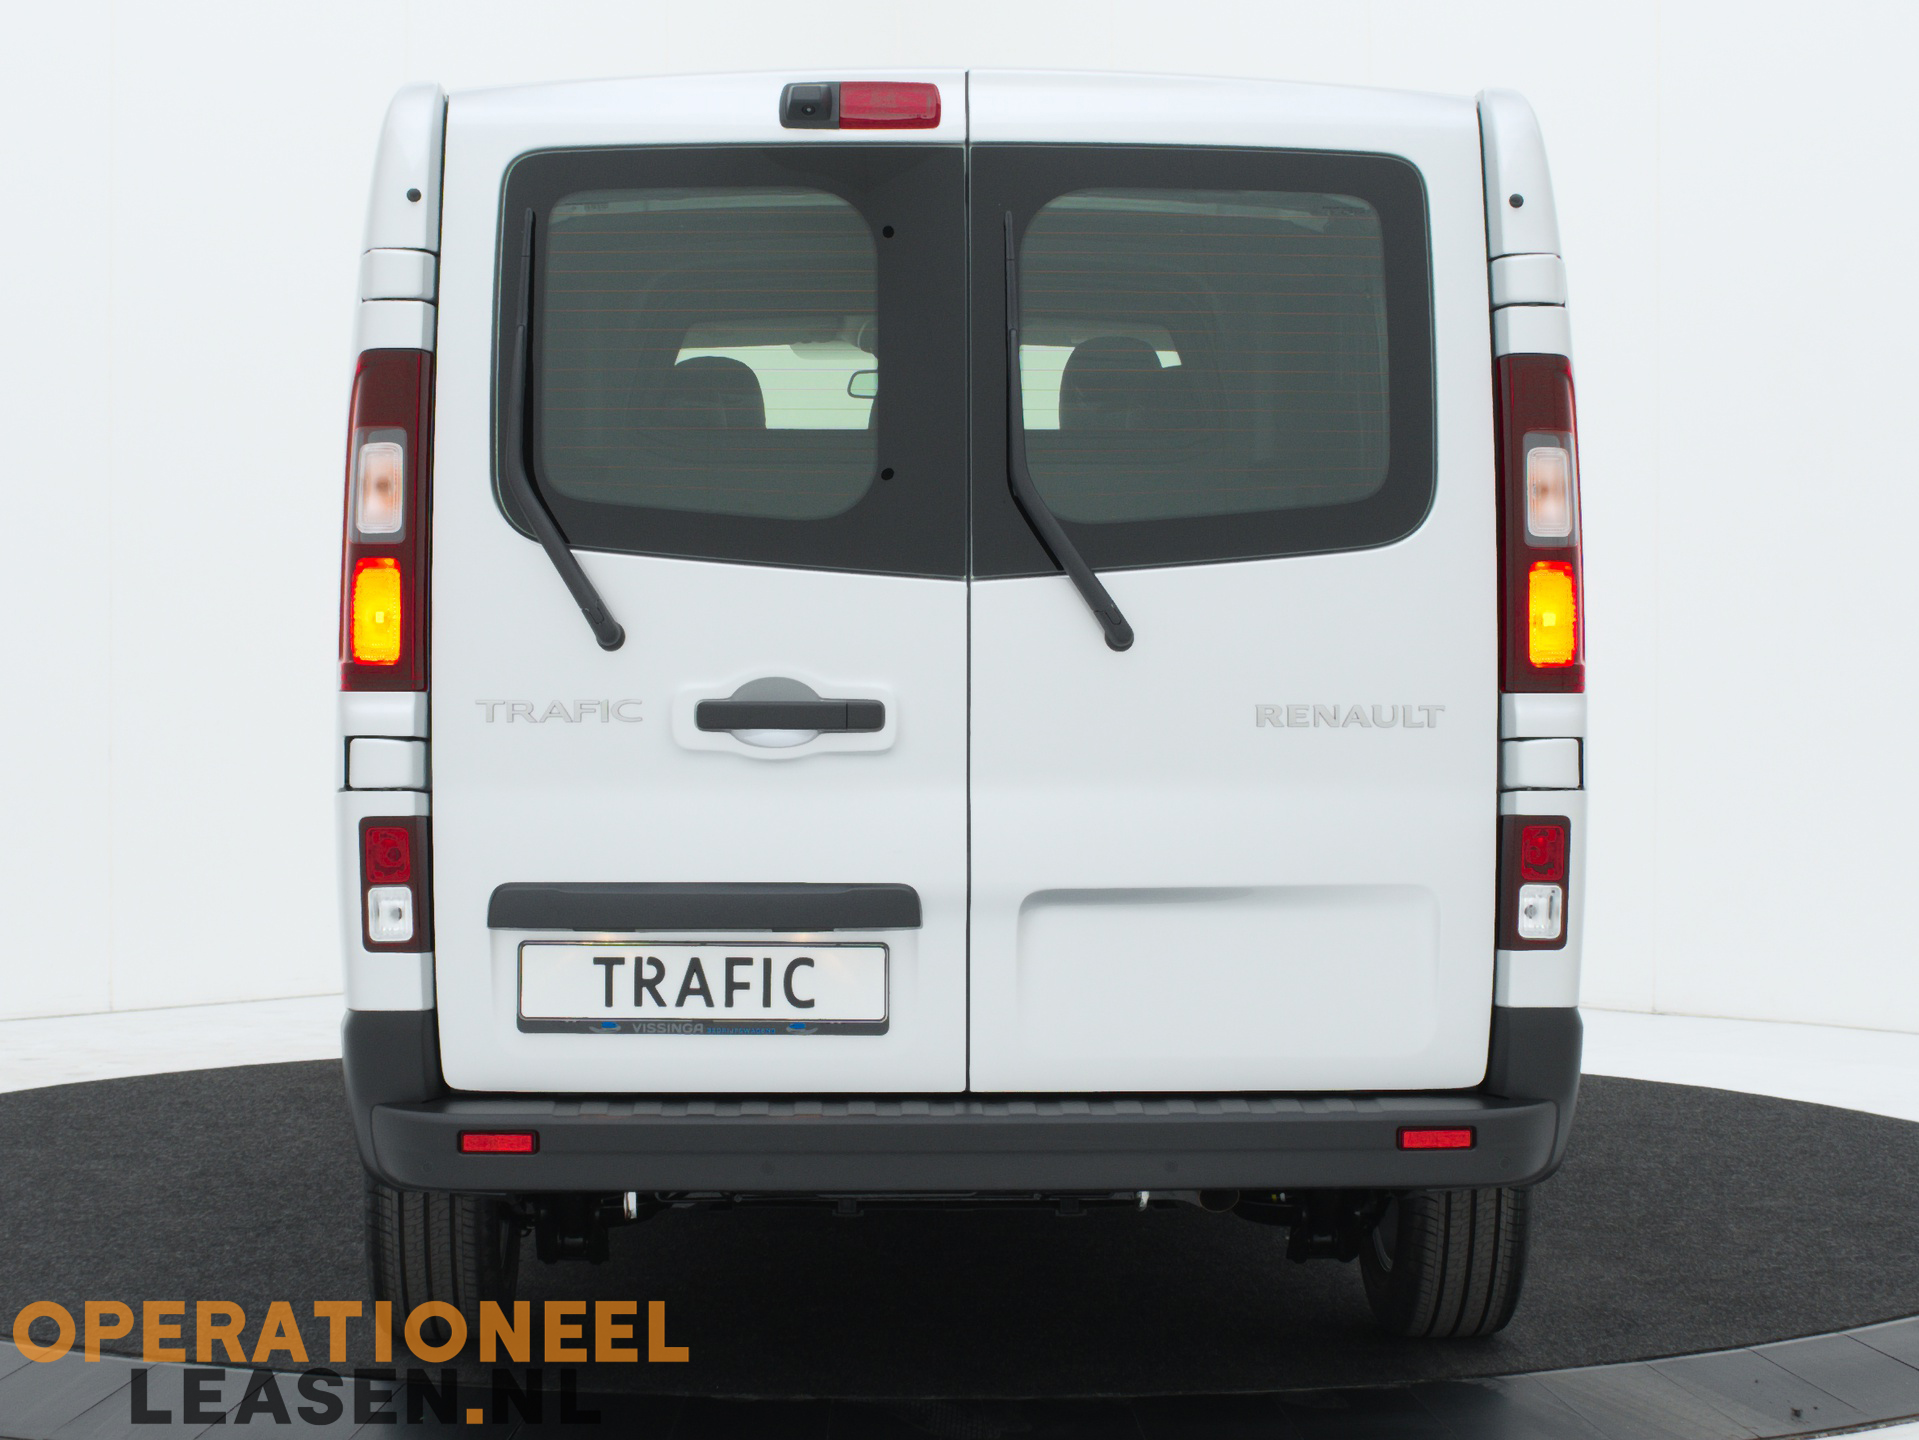 Operational lease Renault master traffic-11